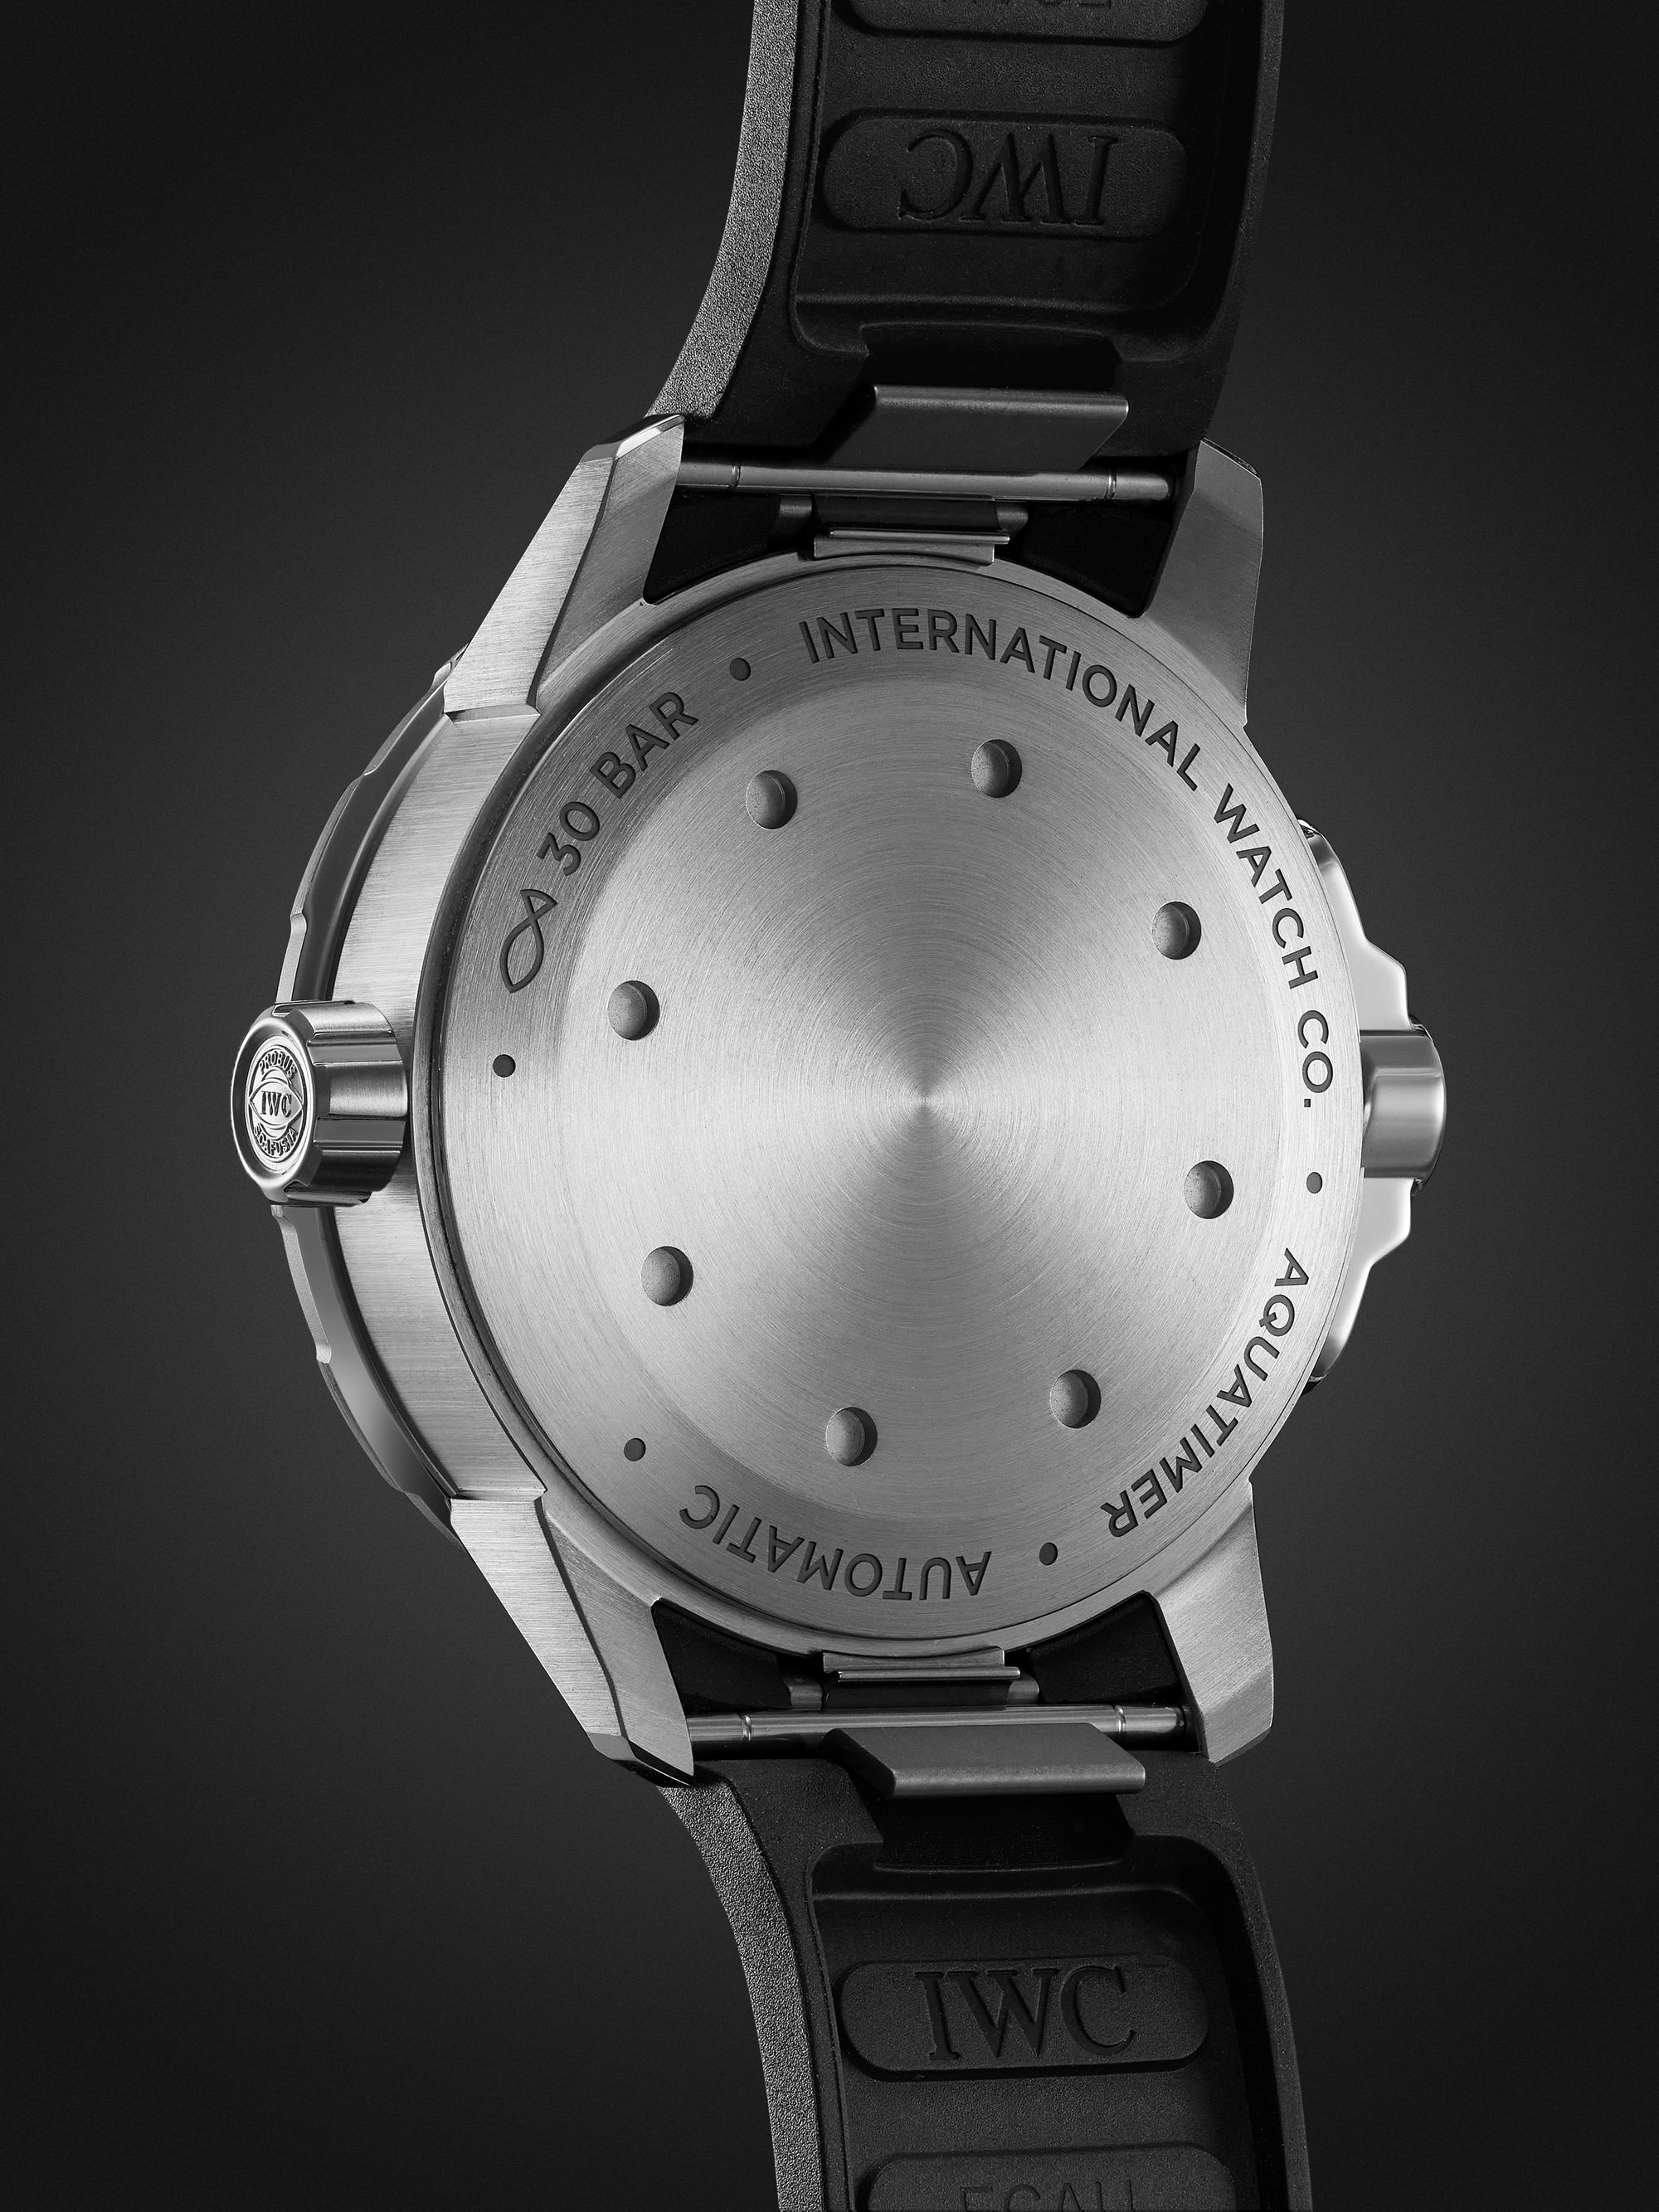 IWC SCHAFFHAUSEN Aquatimer Automatic 42mm Stainless Steel and Rubber Watch, Ref. No. IW328802